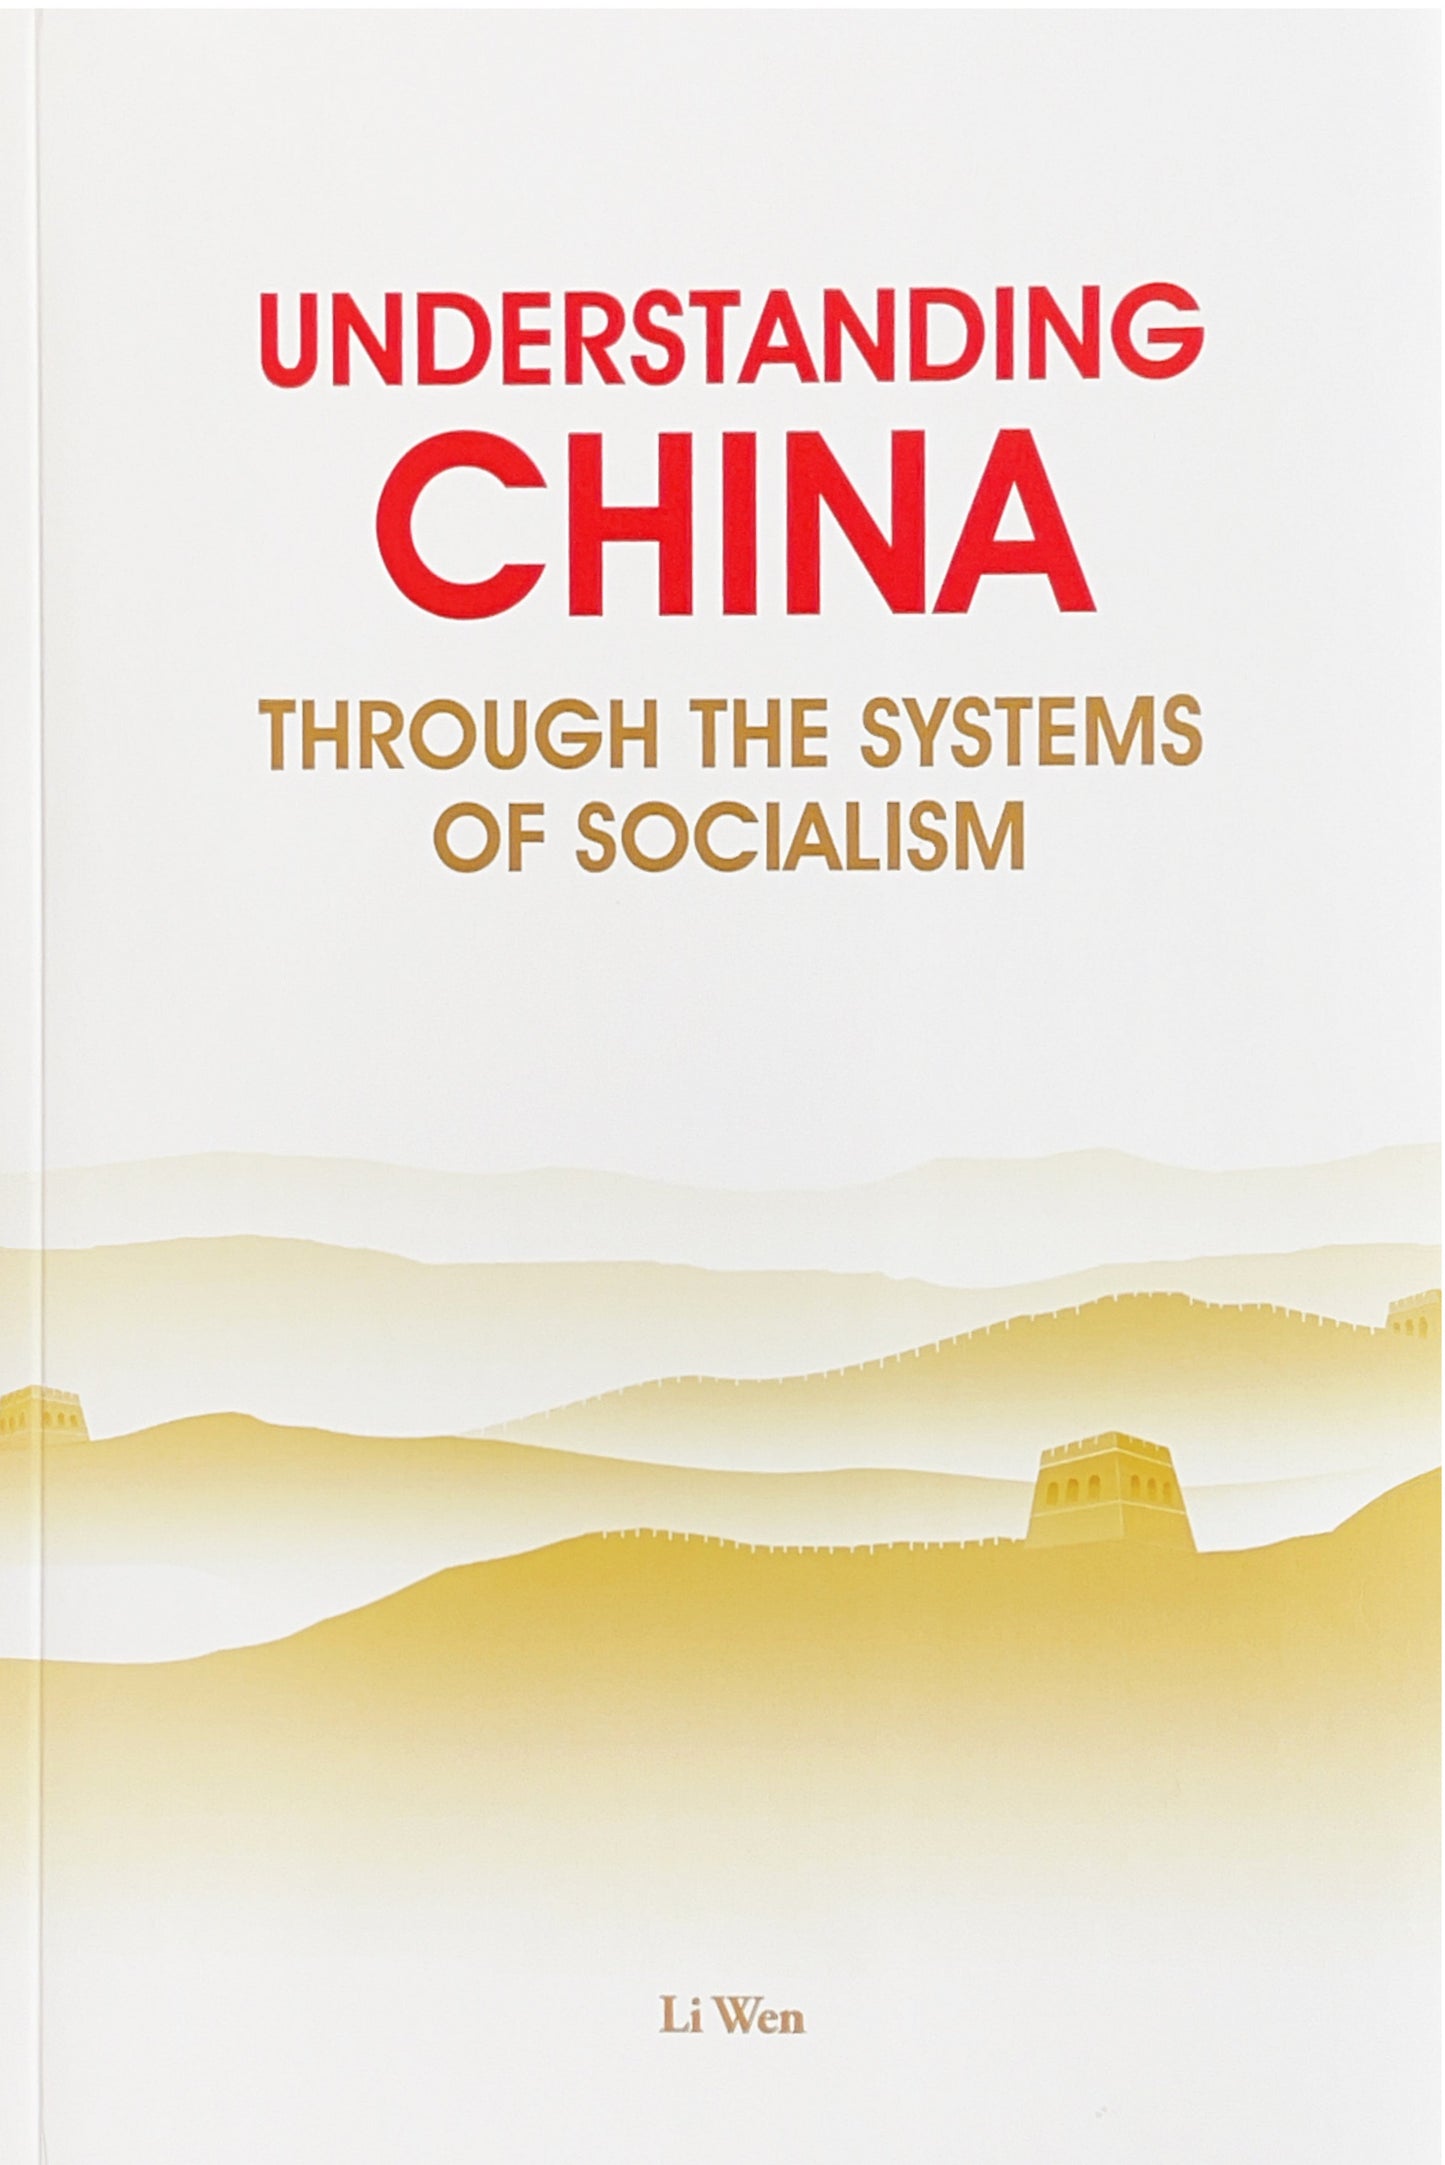 Understanding China: Through the Systems of Socialism